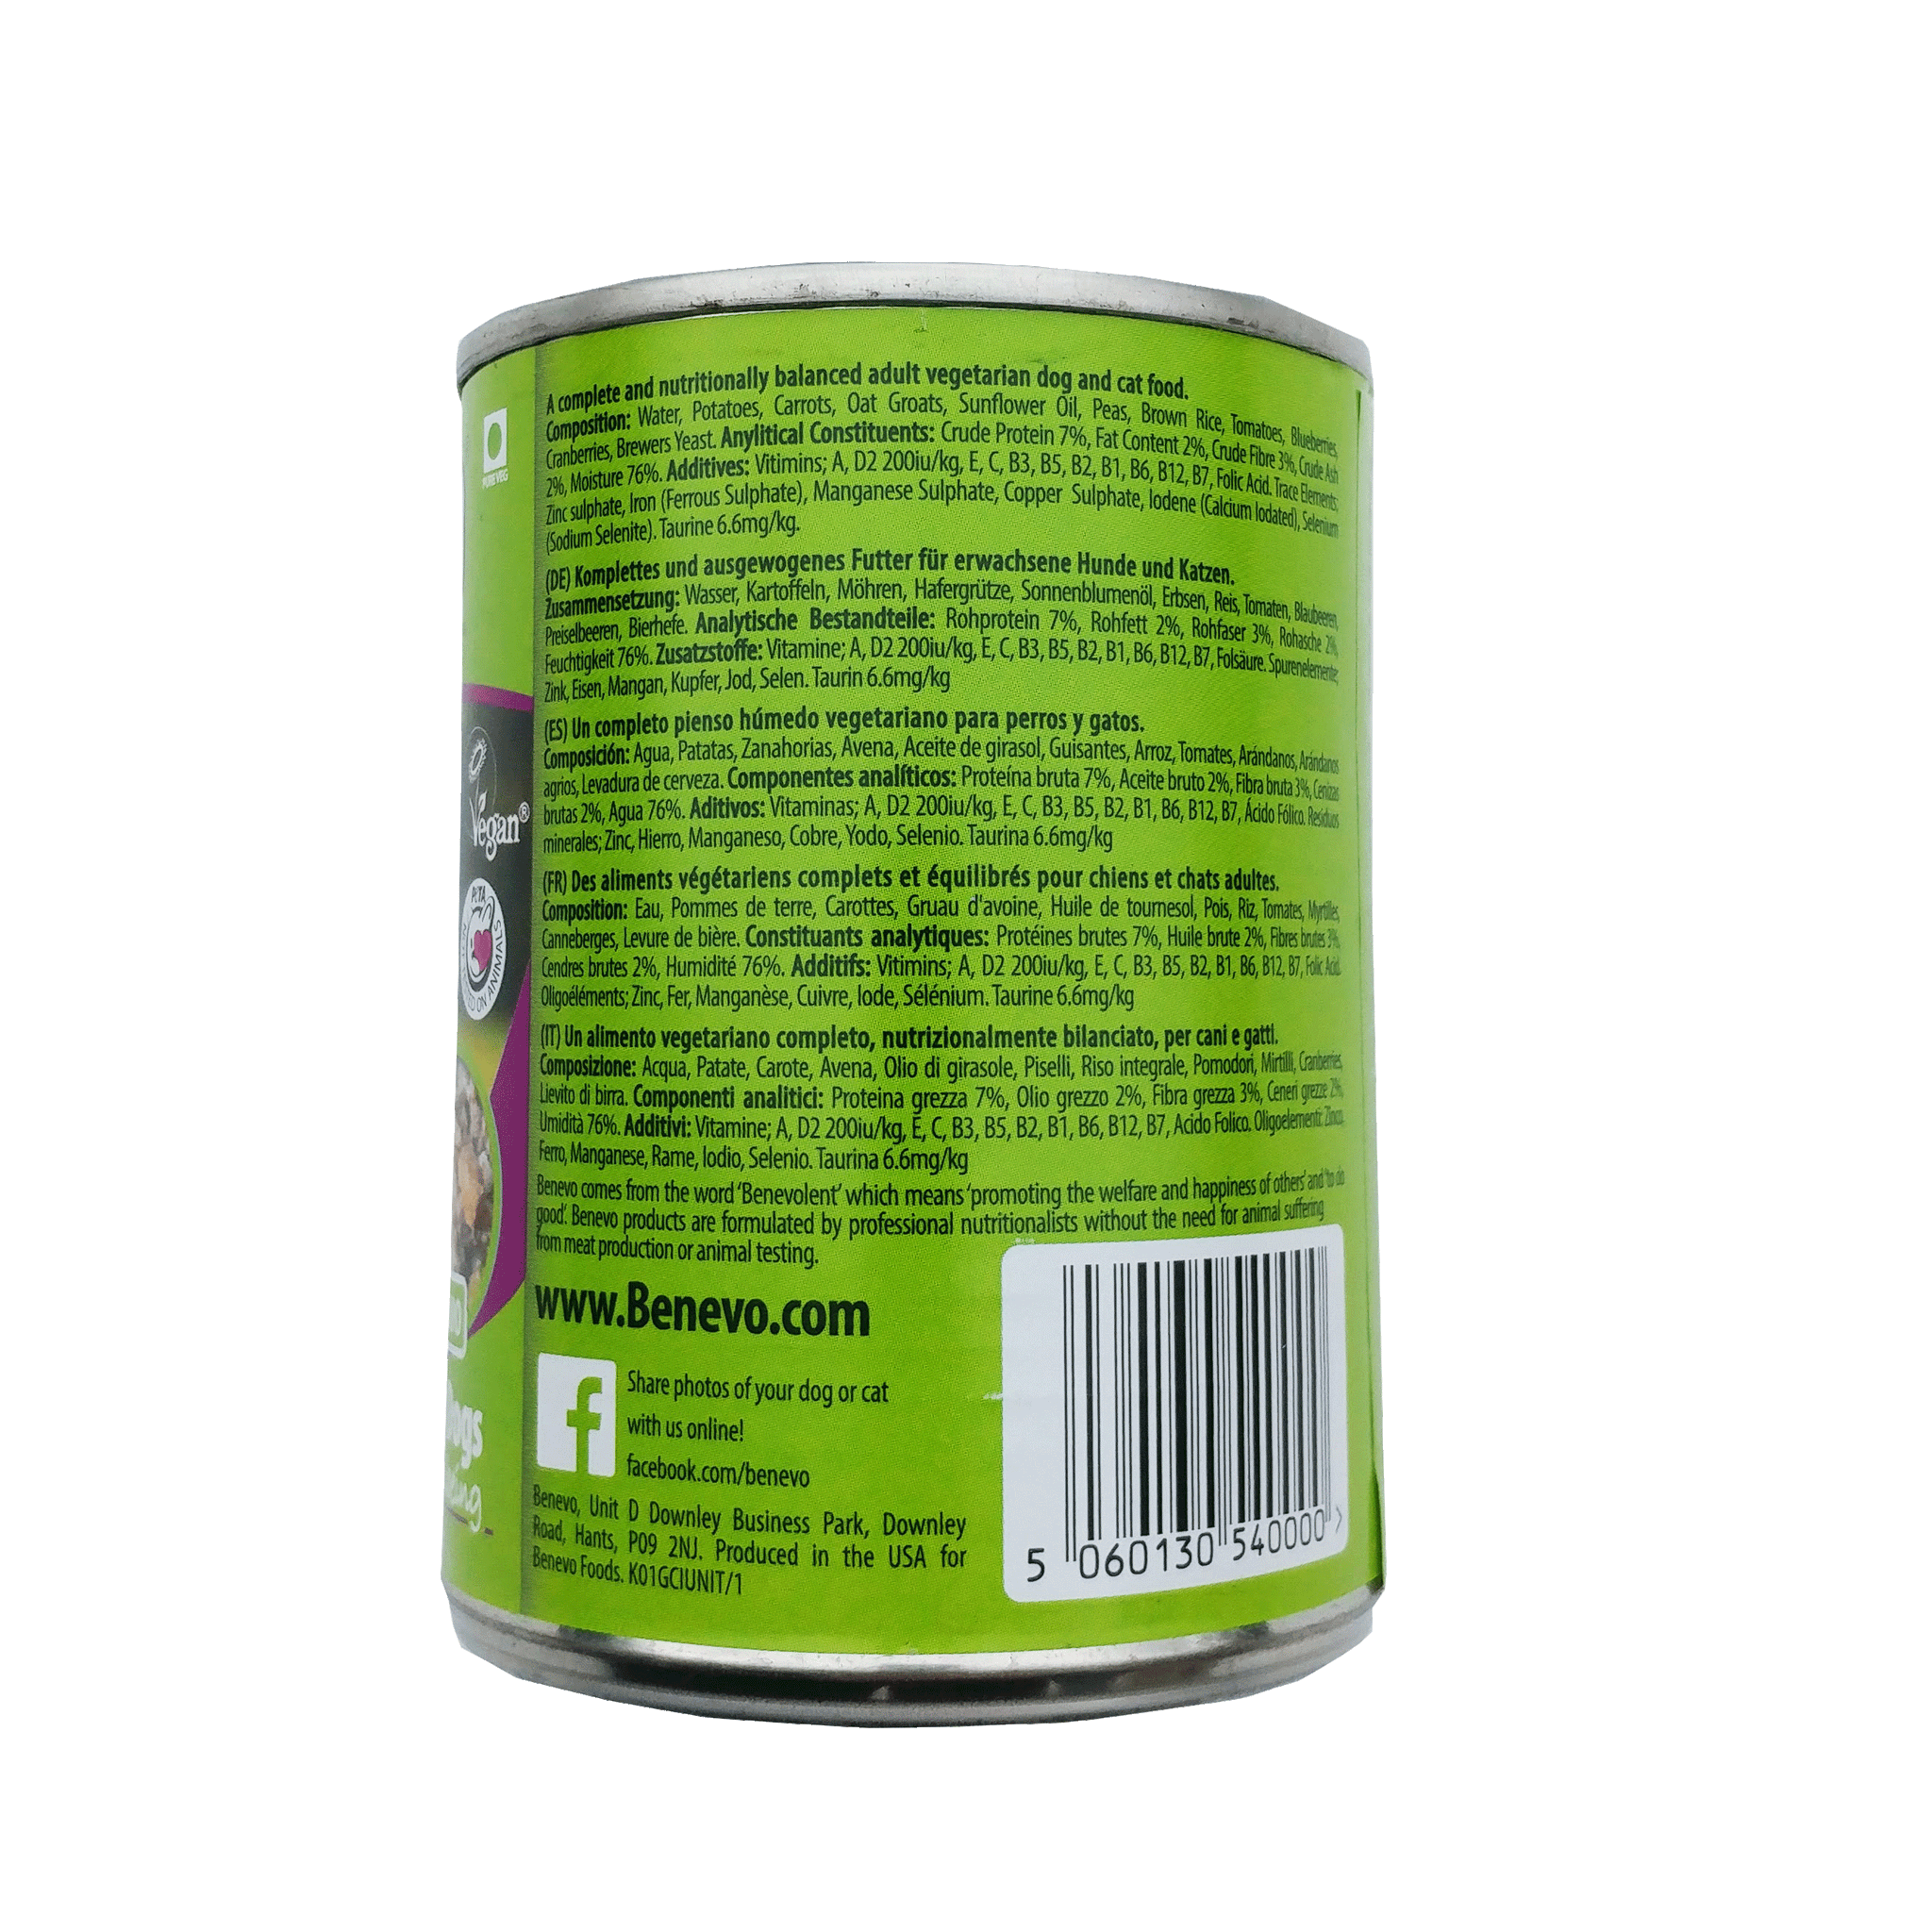 Benevo Duo - Complete Food for Cats and Dogs - Case of 12 cans